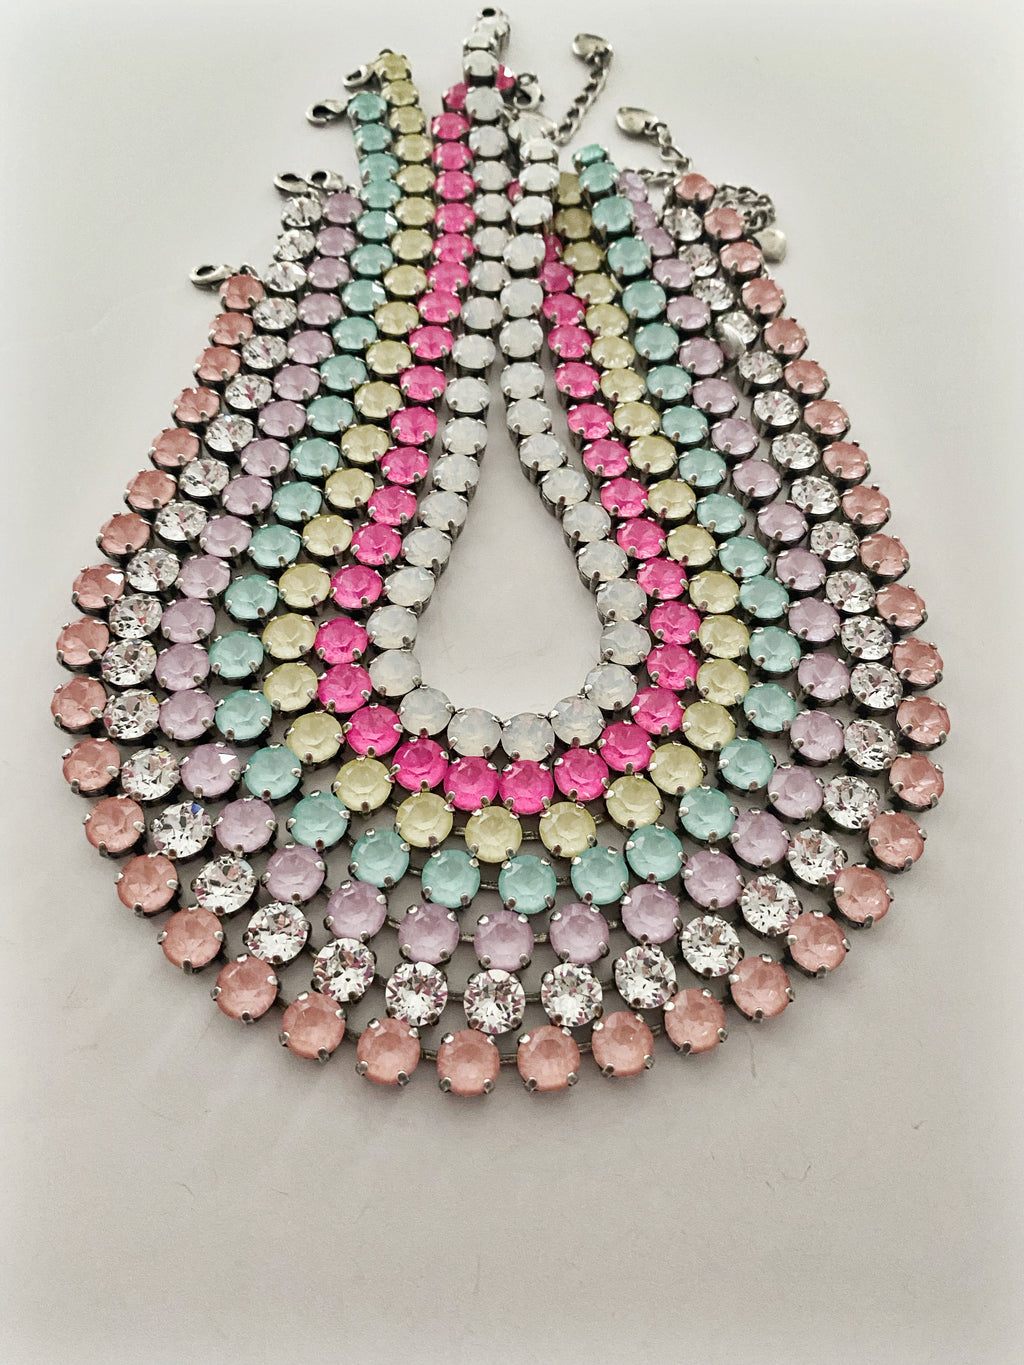 Collier Safira Electric pink